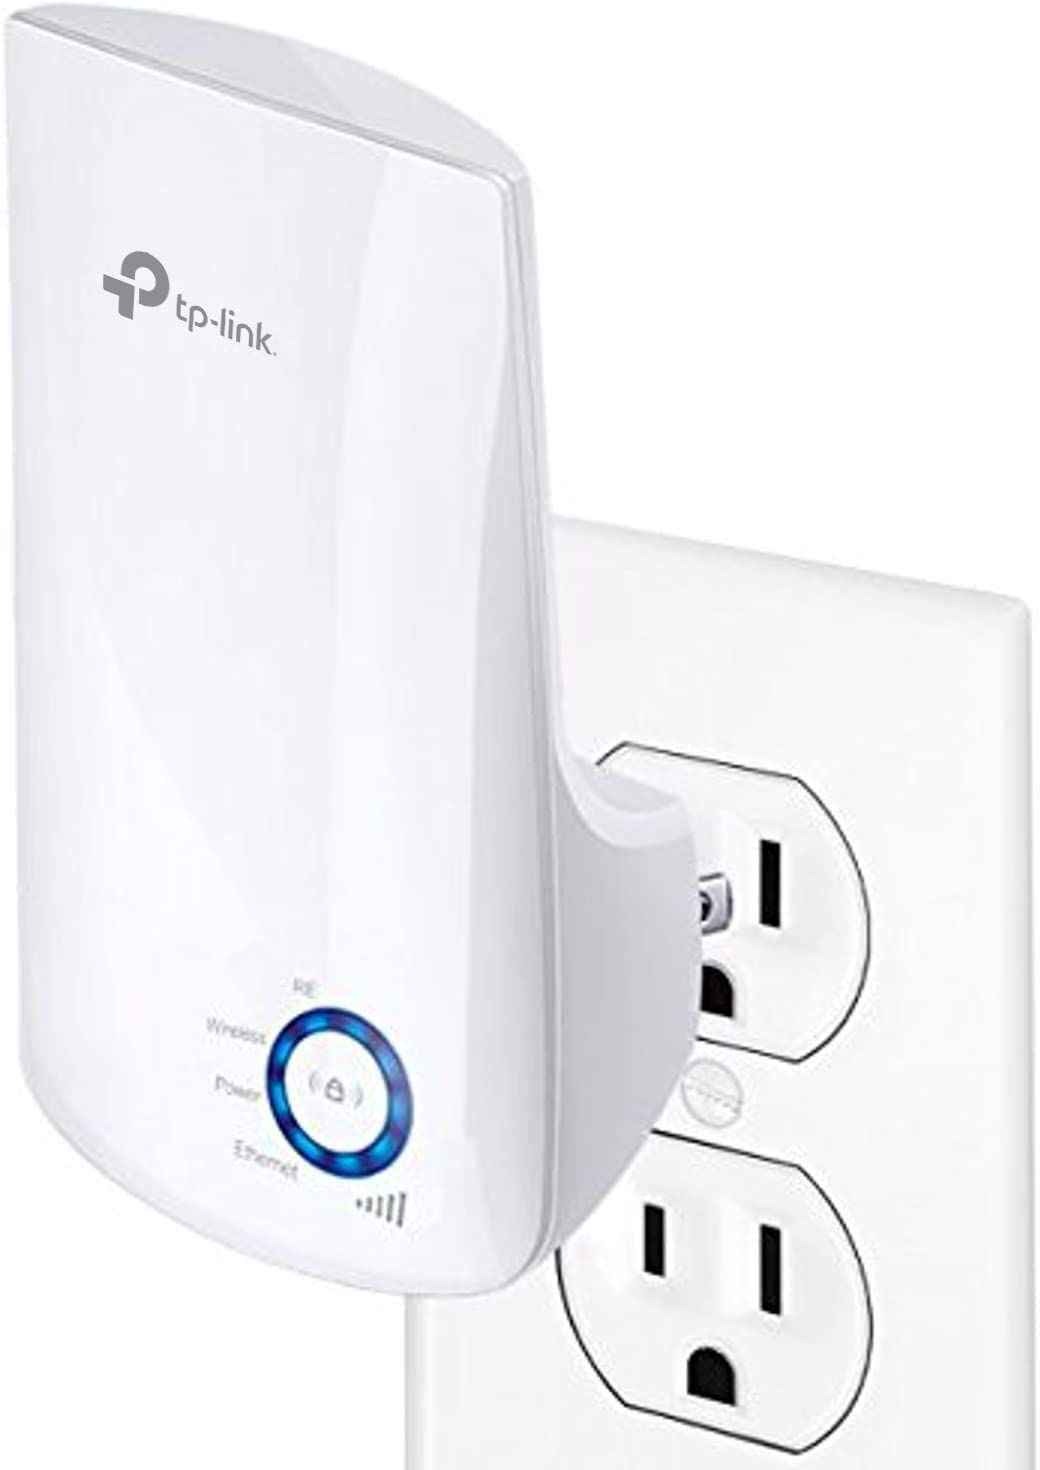 TP-Link N300 Tl-WA850RE - WiFi Network Extender Repeater 